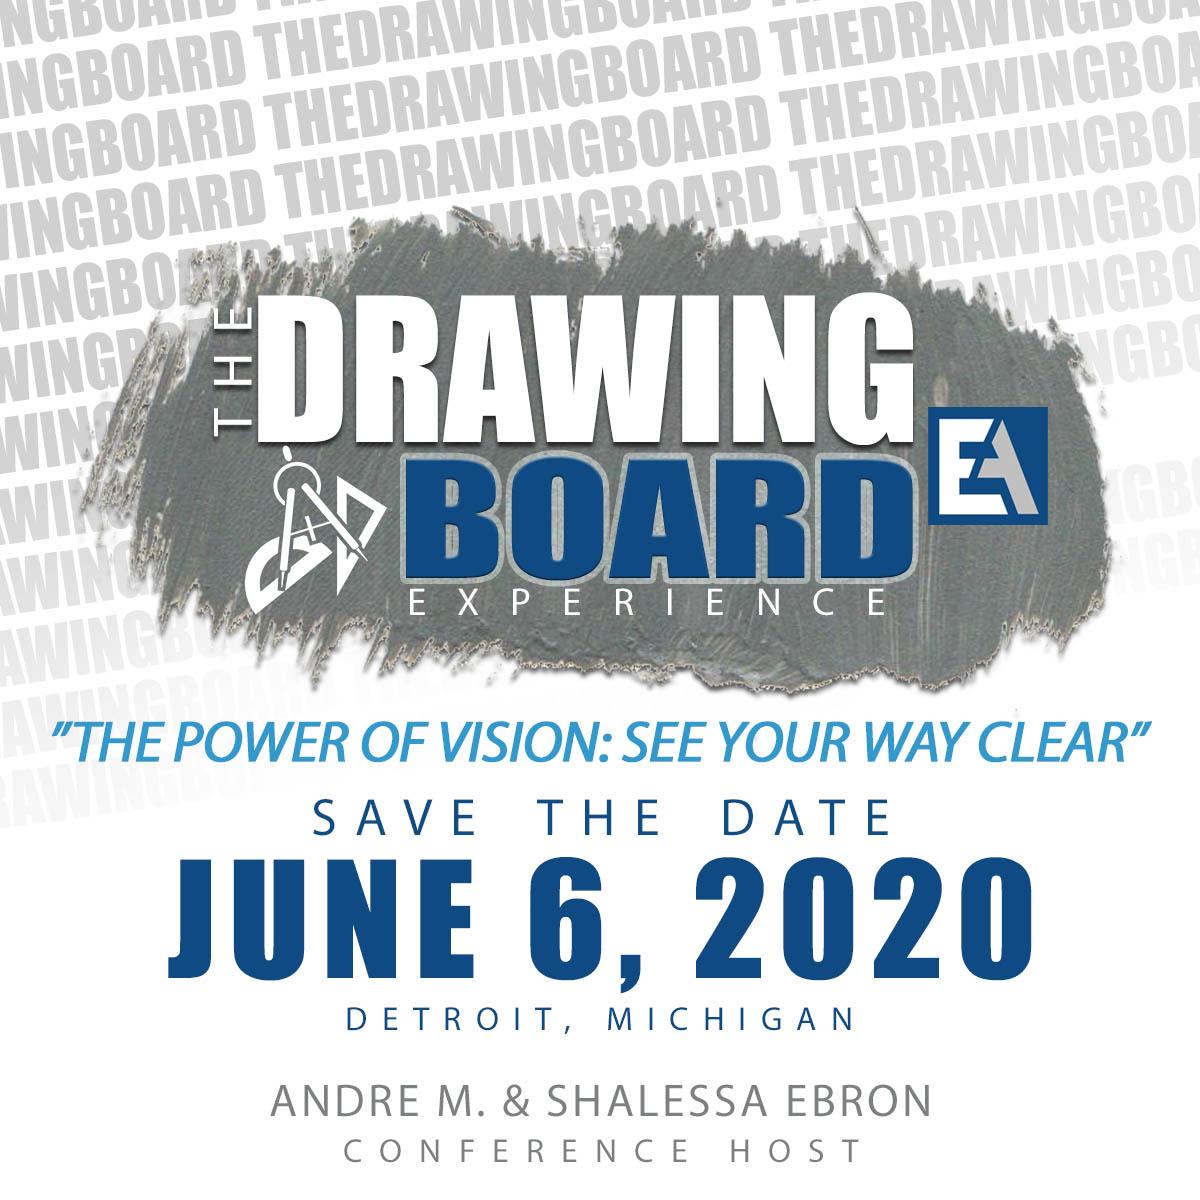 THE DRAWING BOARD EXPERIENCE 2020